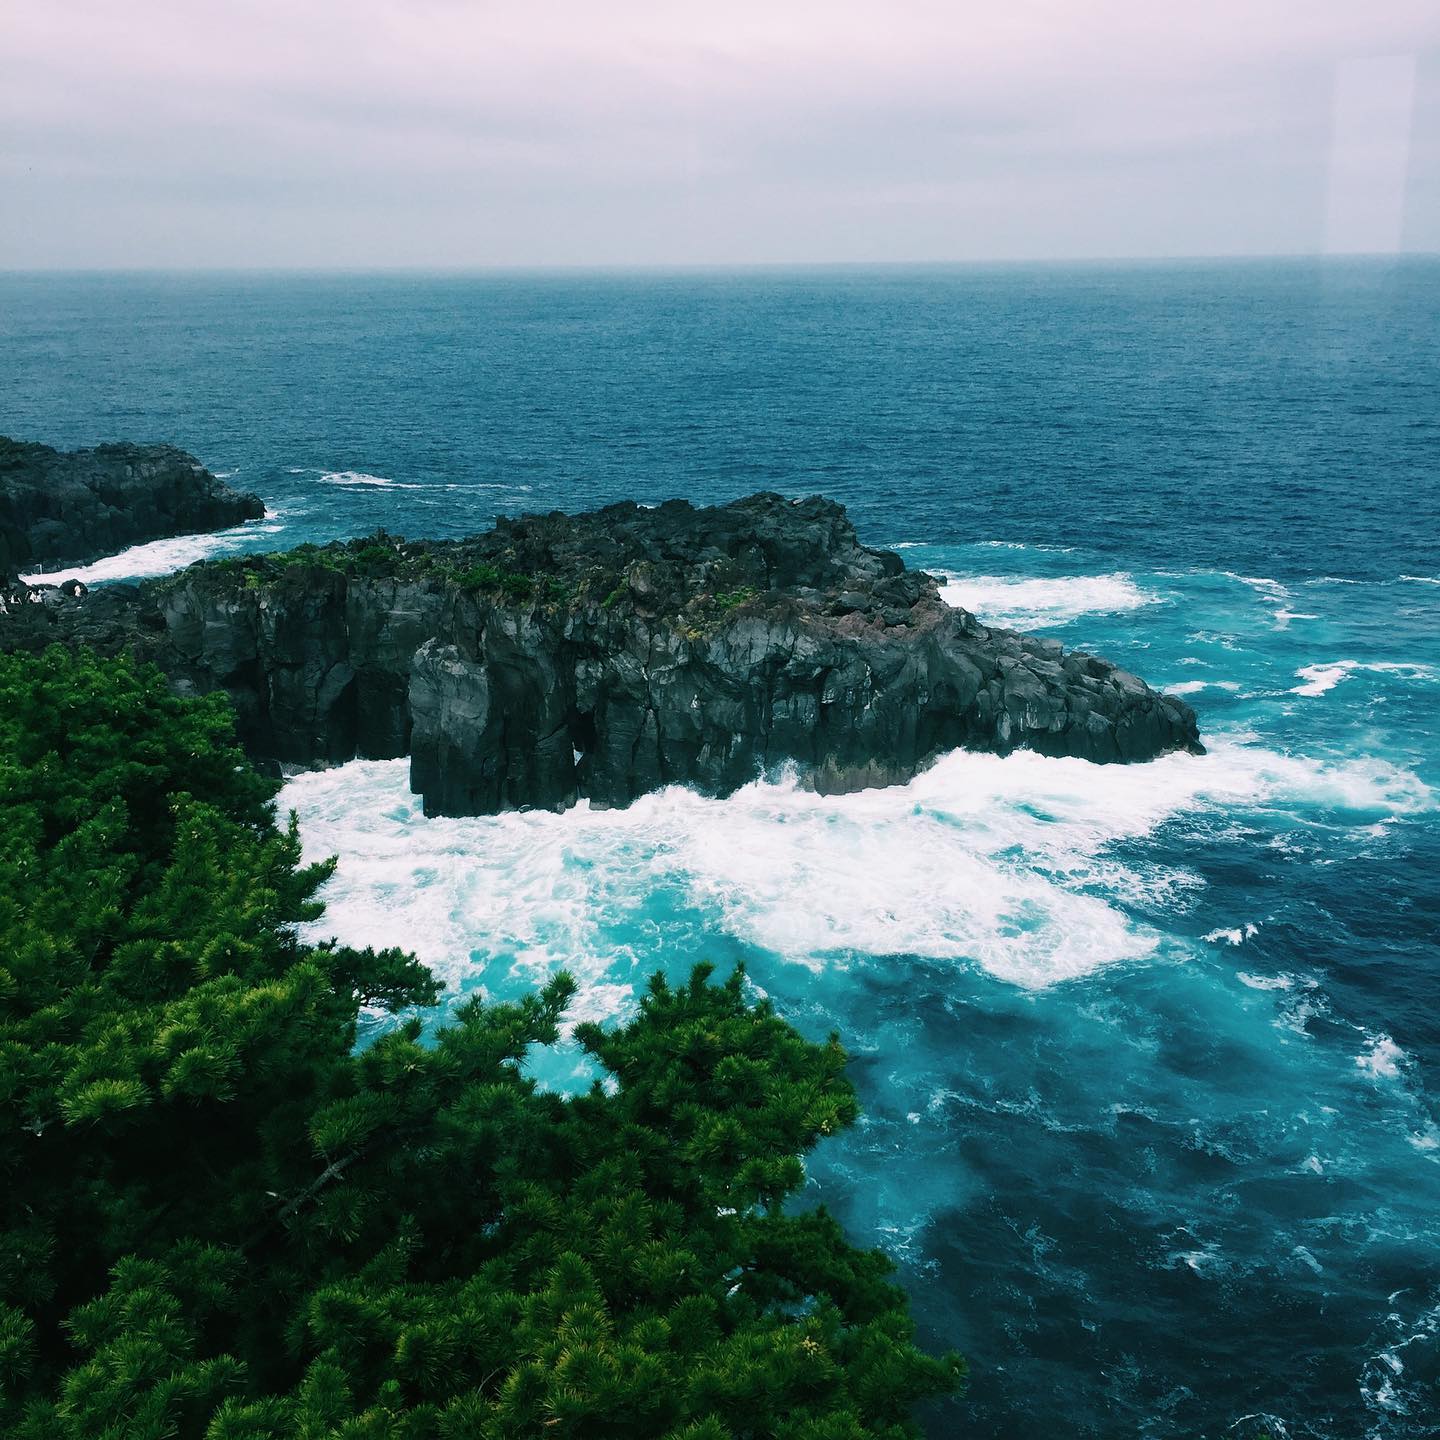 _⁣
Here’s today’s  #shootinjapan from AOI Global at the Jogasaki Coast in the Izu peninsula. ⁣

The Jogasaki Coast, is a rugged stretch of dark volcanic cliff coastline on the eastern shore of the Izu Peninsula, southwest of Tokyo.
Walking along the trails in the area, you will be able to see dynamic  views of cliffs, small islands, and waterfalls. 

#aoiglobal  #filmmakersworld  #shootinglocation  #filmmakinglife  #weeklyinspiration�  #remoteshooting⁣